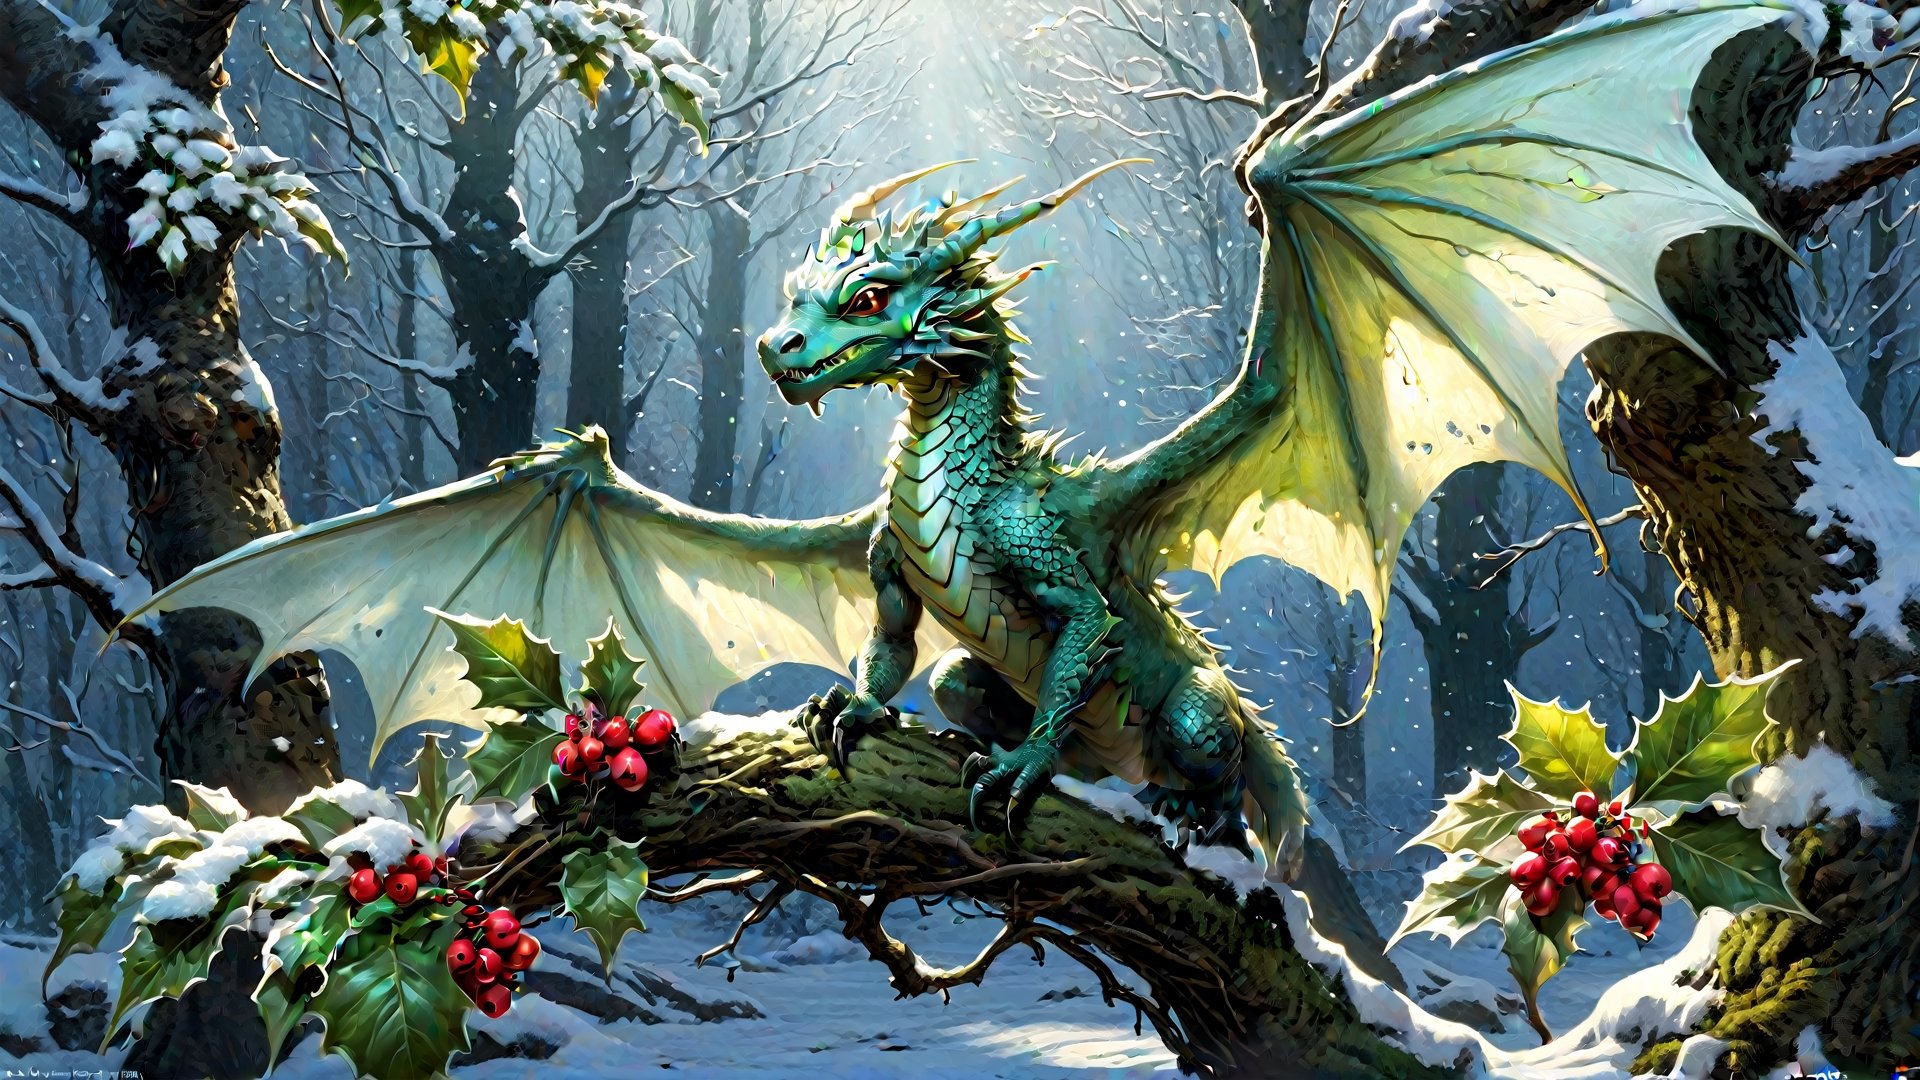 By Marc Simonetti and Hirohiko Araki and Yoji Shinkawa, charlie bowater and todd lockwood || winter theme || a teeny tiny adult nature fae dragon that has the body of a plant and the wings of an insect, the scene shows it sitting on a frozen tree branch, it is holding a holly berry, merry and bright || adorable, heartwarming, uplifting, snowy beautiful december || reflections, ray tracing, iridescence, glow || cgsociety, amazing, intricate, hyperdetailed beautiful, fantasy, artstation, perfect composition